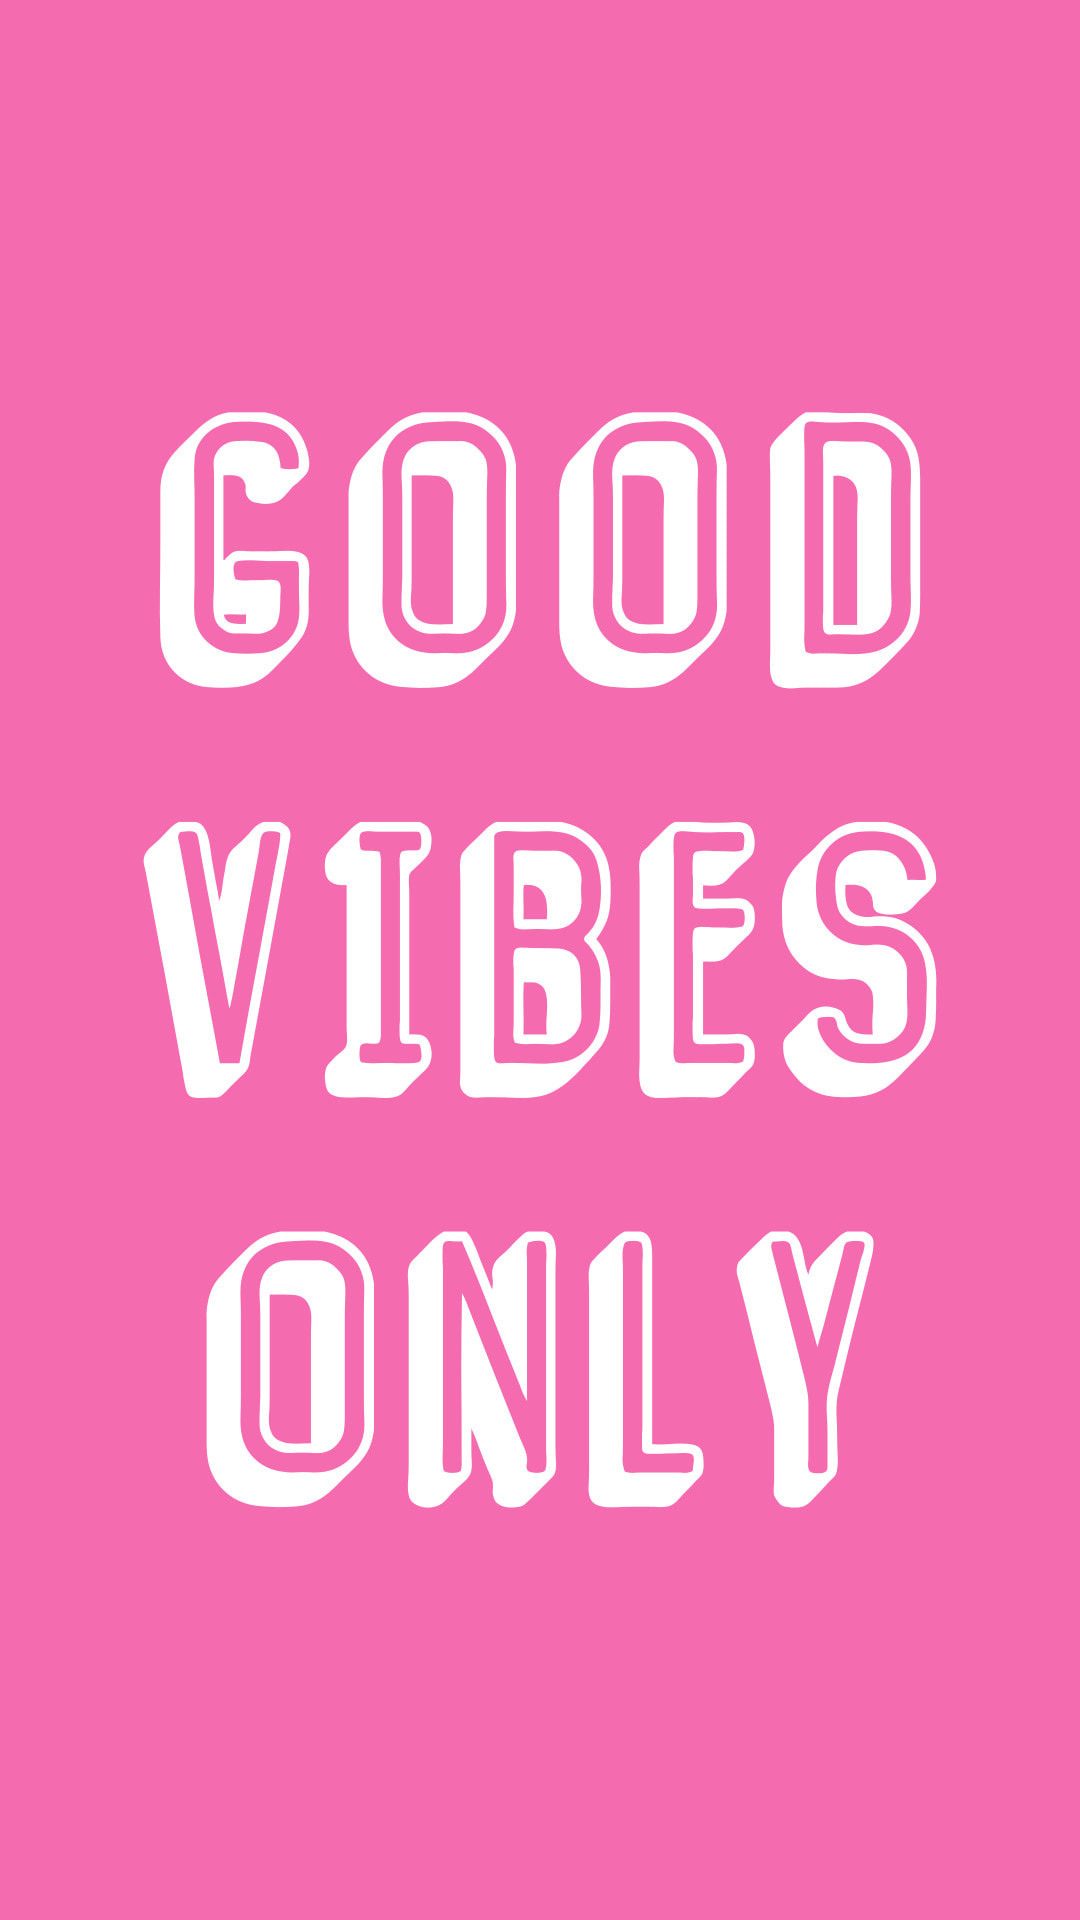 30 Vibes Free Photos and Images  picjumbo